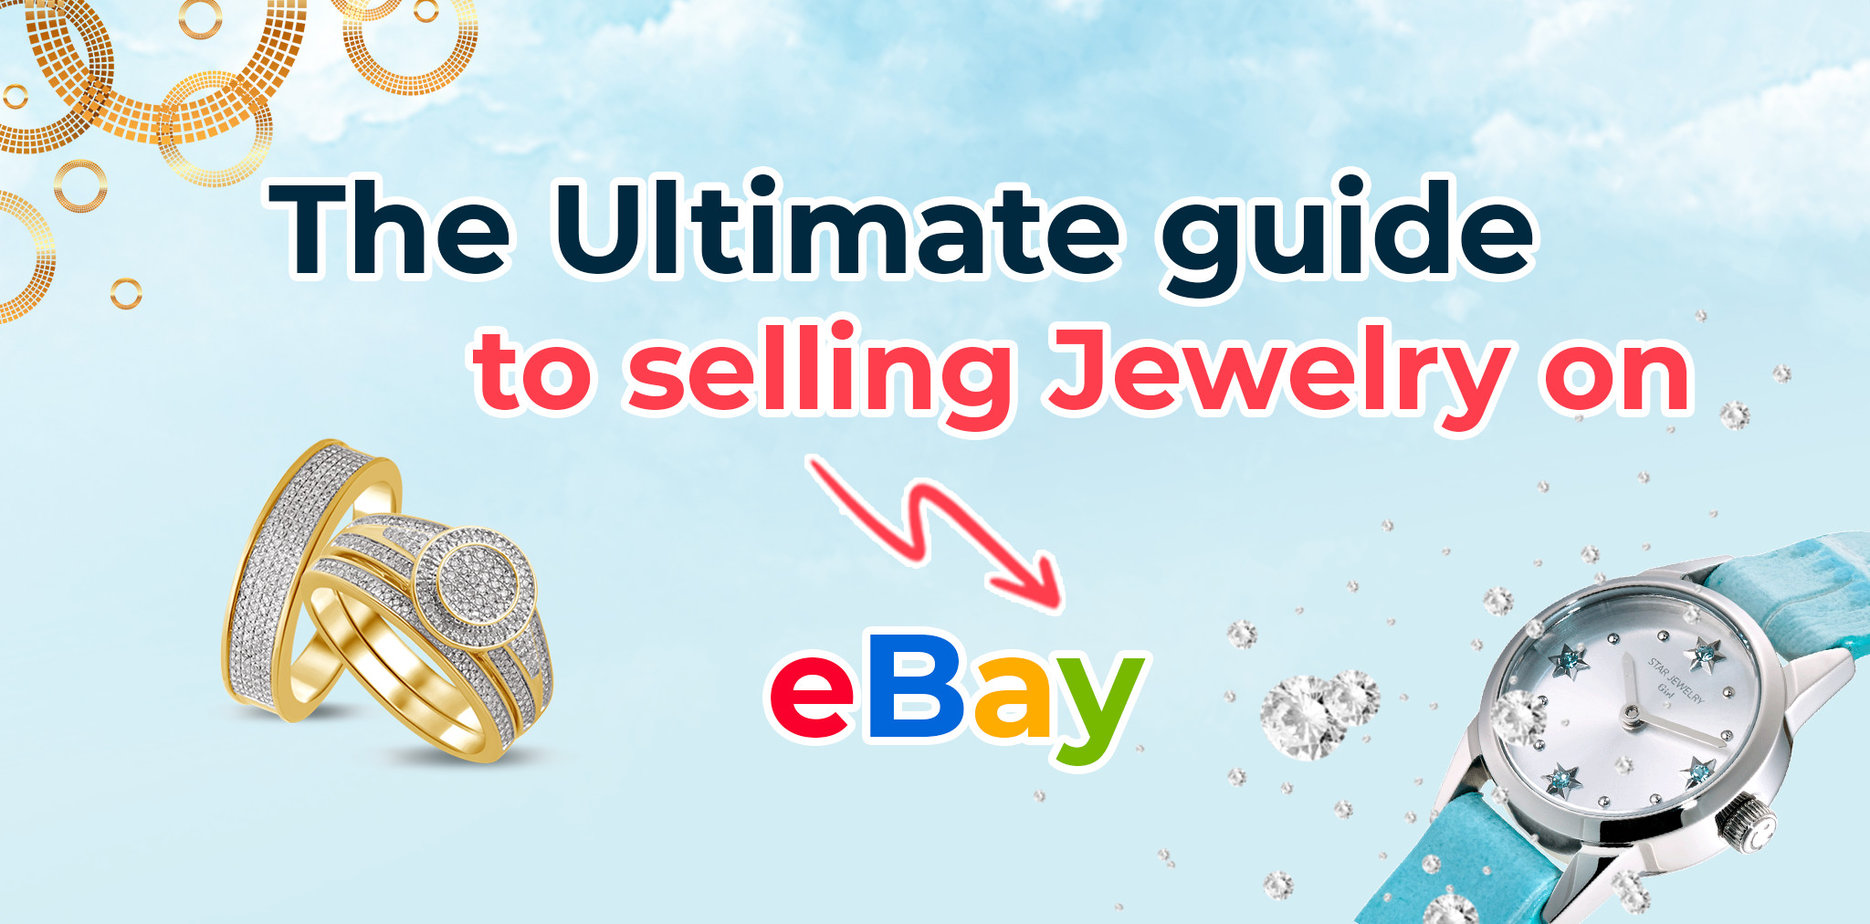 EBay Enhances Secondary Market Luxury Offerings With New Certified By  Brand Program